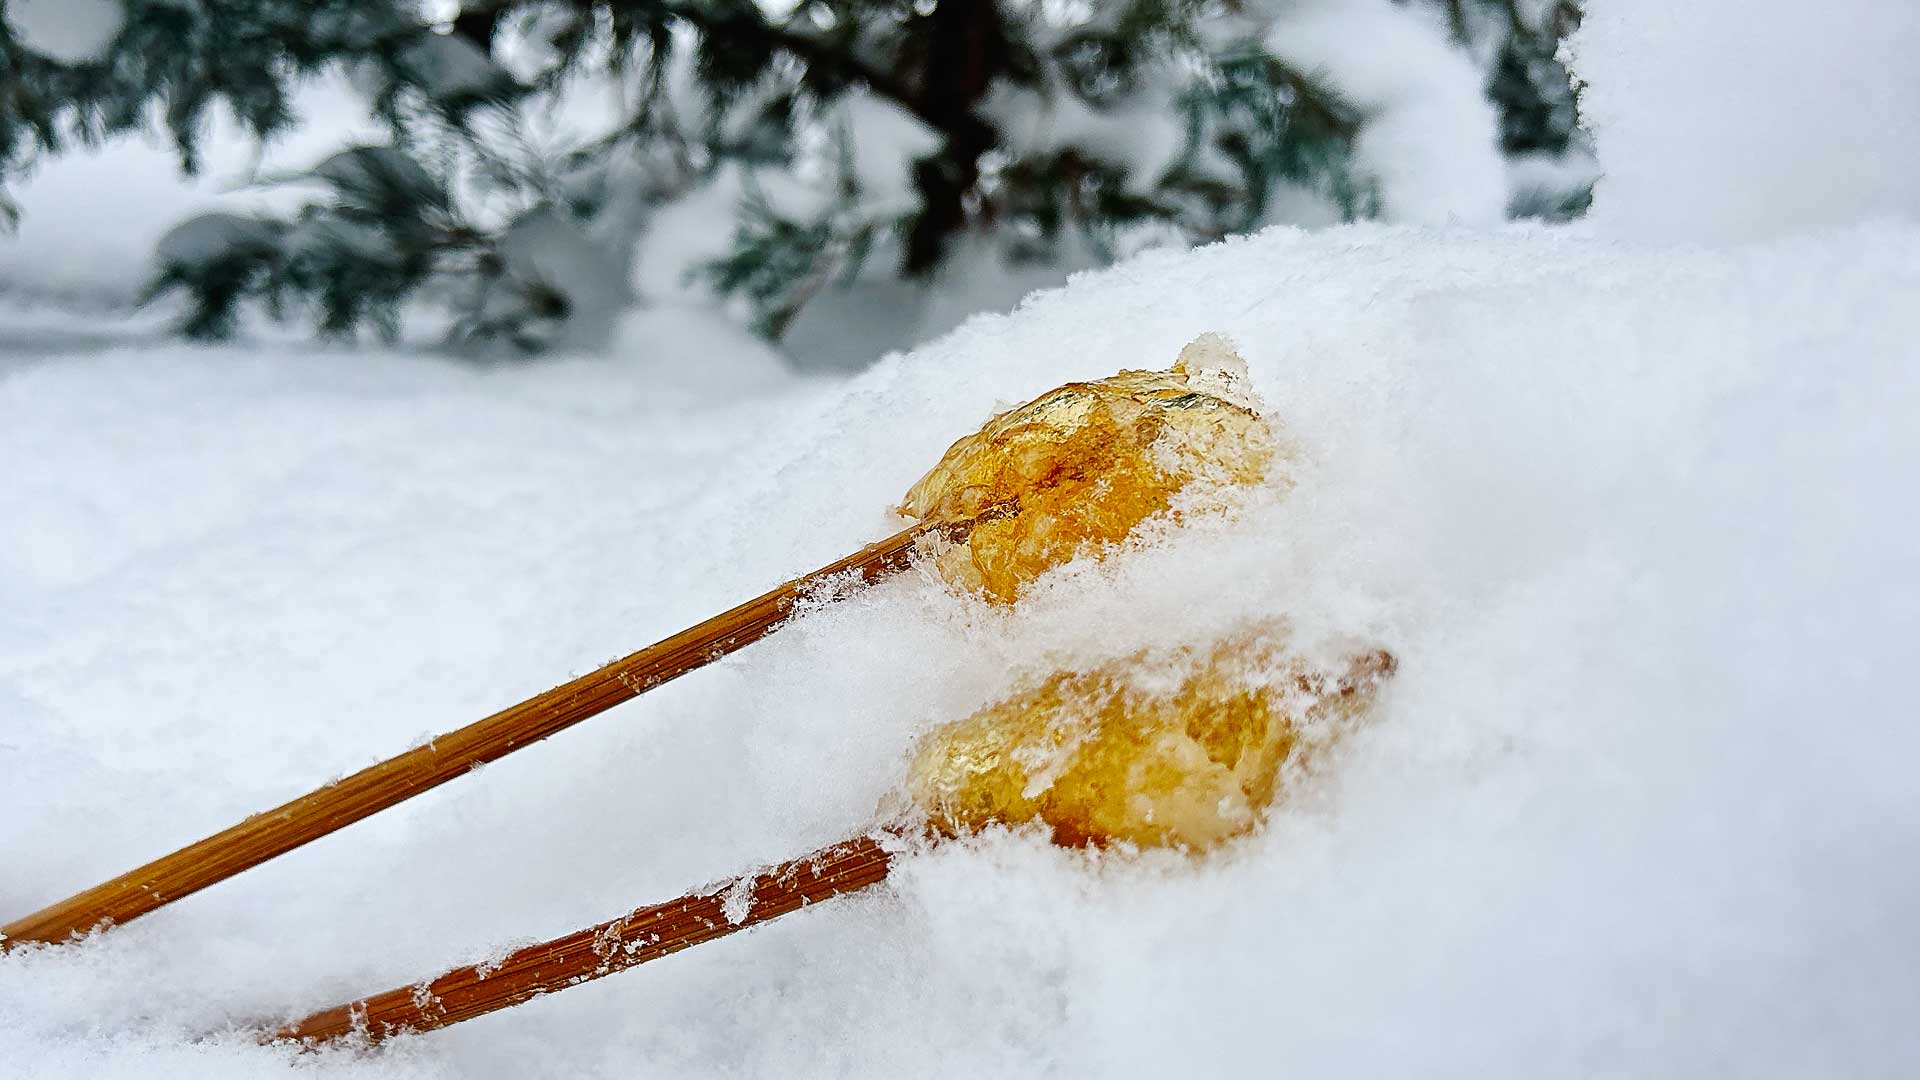 Join us as we guide you through the simple and mouthwatering process of crafting this delightful sugar on snow candy from just 1 ingredient: pure, golden maple syrup. The combination of the hot, amber syrup and the cold, pristine snow creates a magical experience for your taste buds. #winterfamilyfun #homemadecandy #oneingredientcandy #mapletaffy, #sugaronsnow